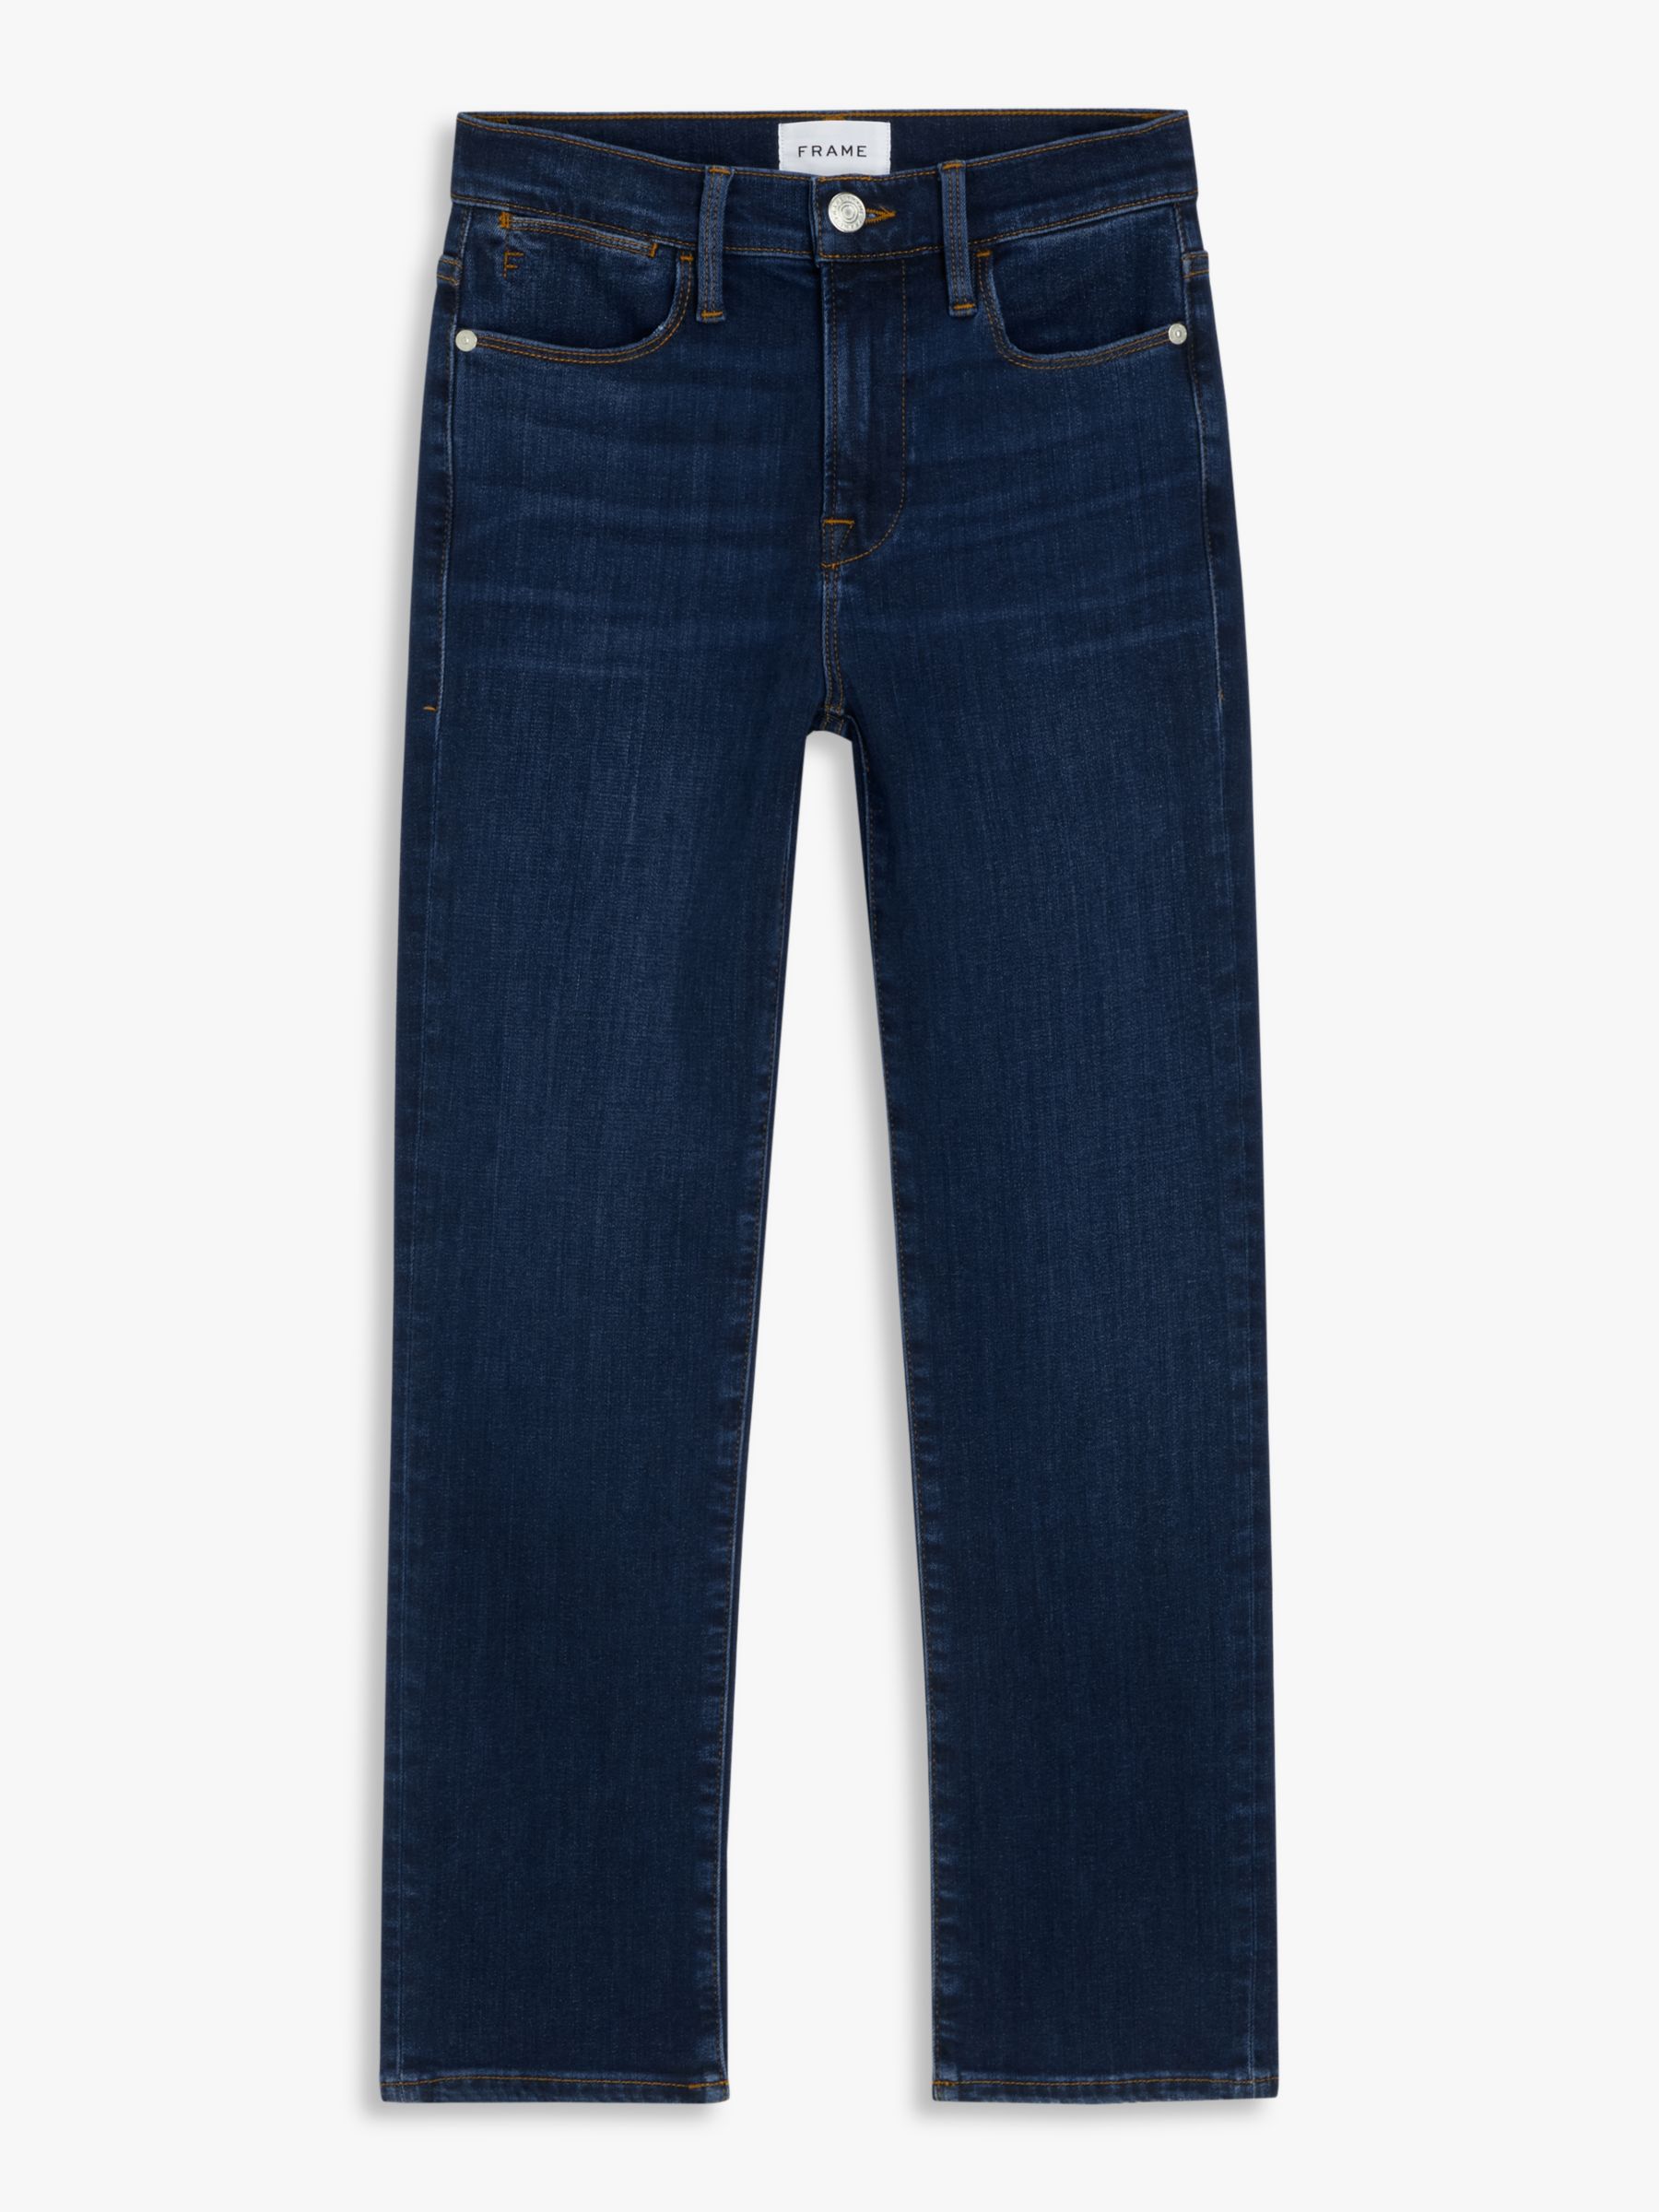 FRAME Le High Straight Leg Jeans, Majesty at John Lewis & Partners